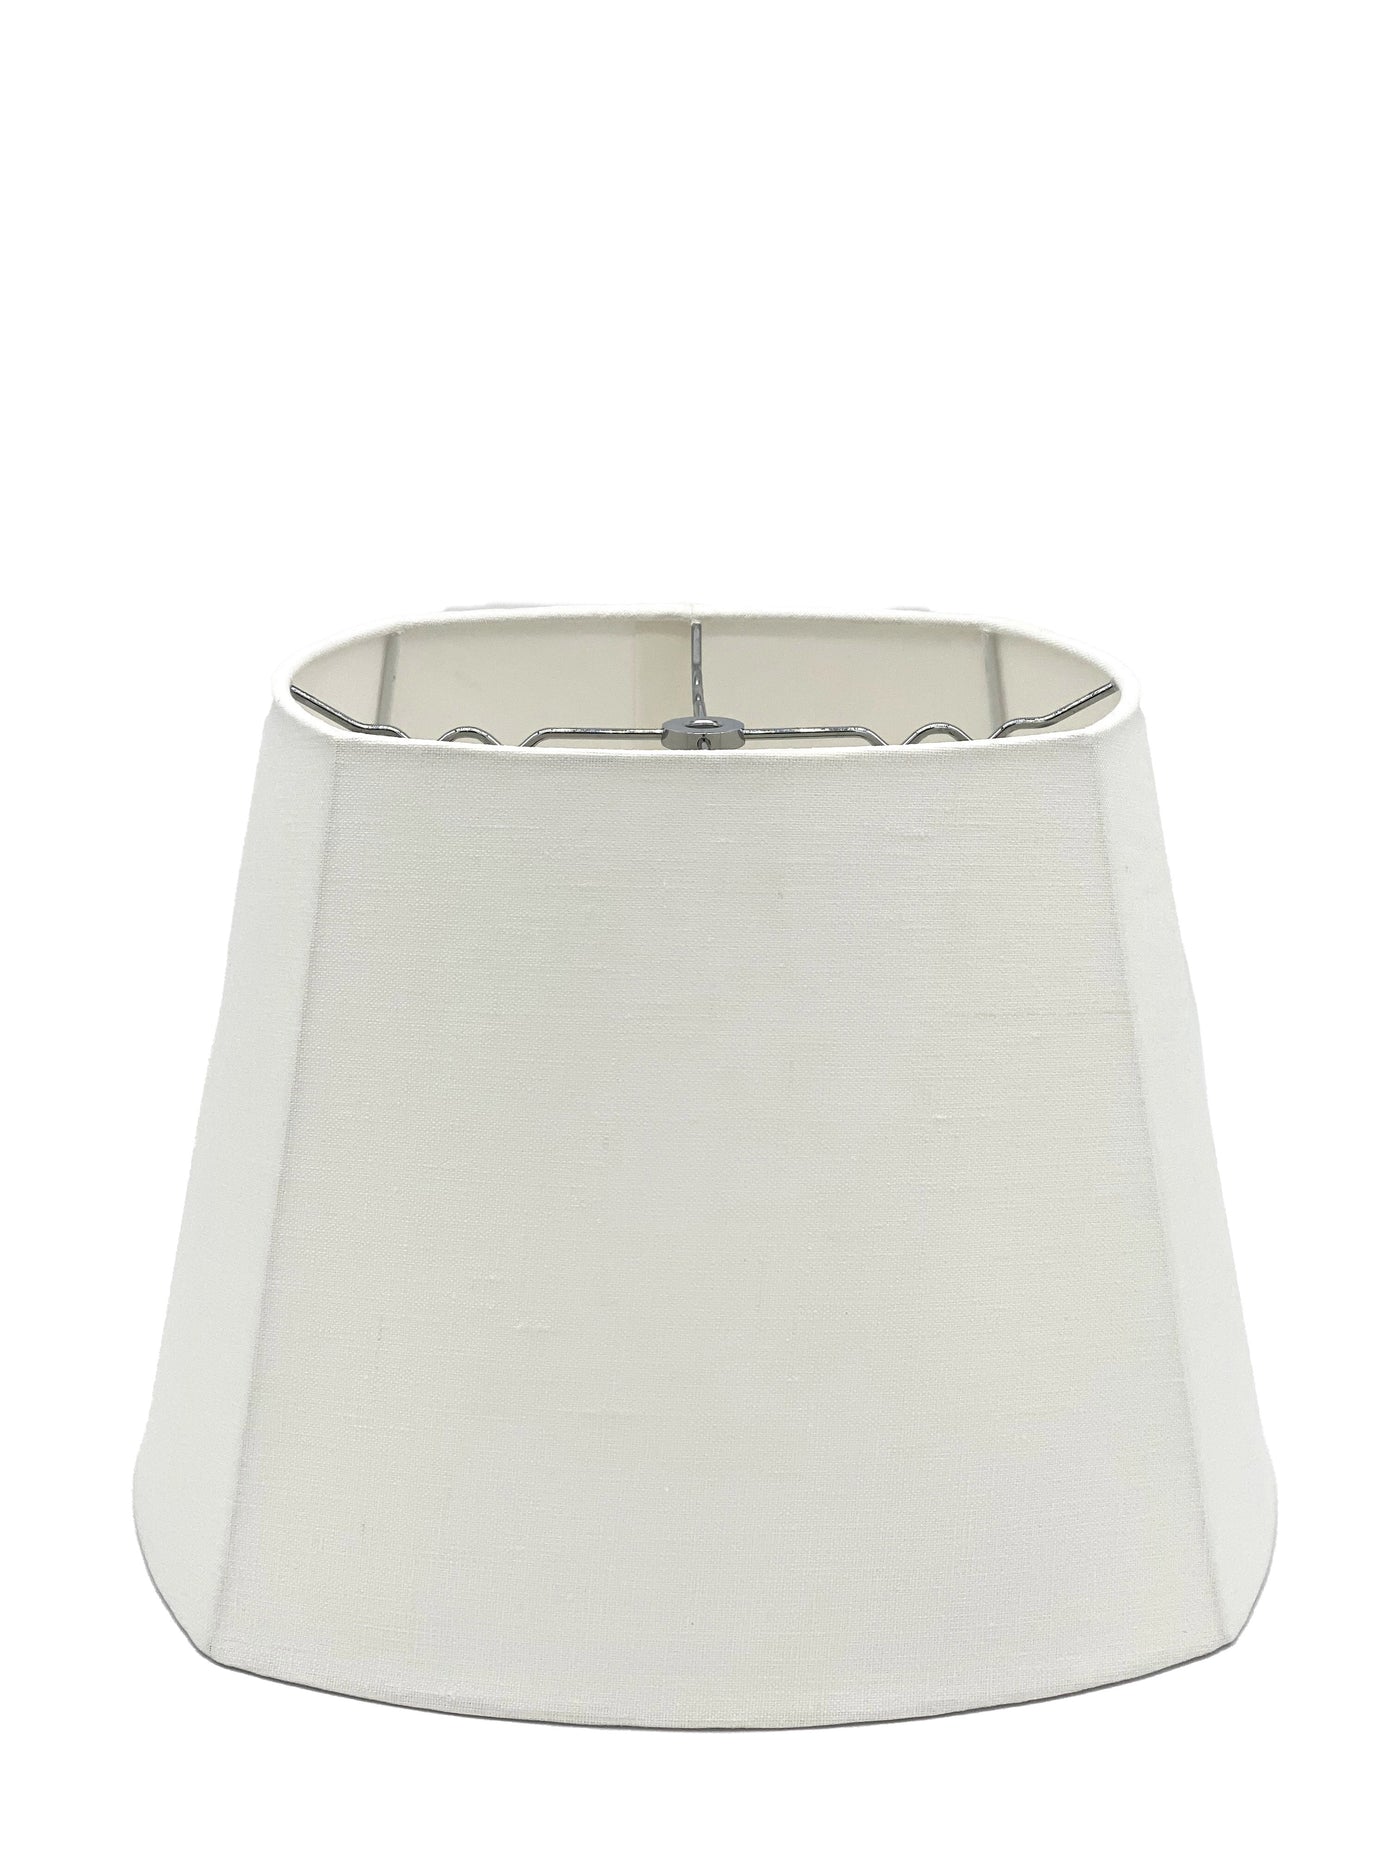 Linen Rolled Edge Modern Square Lampshade